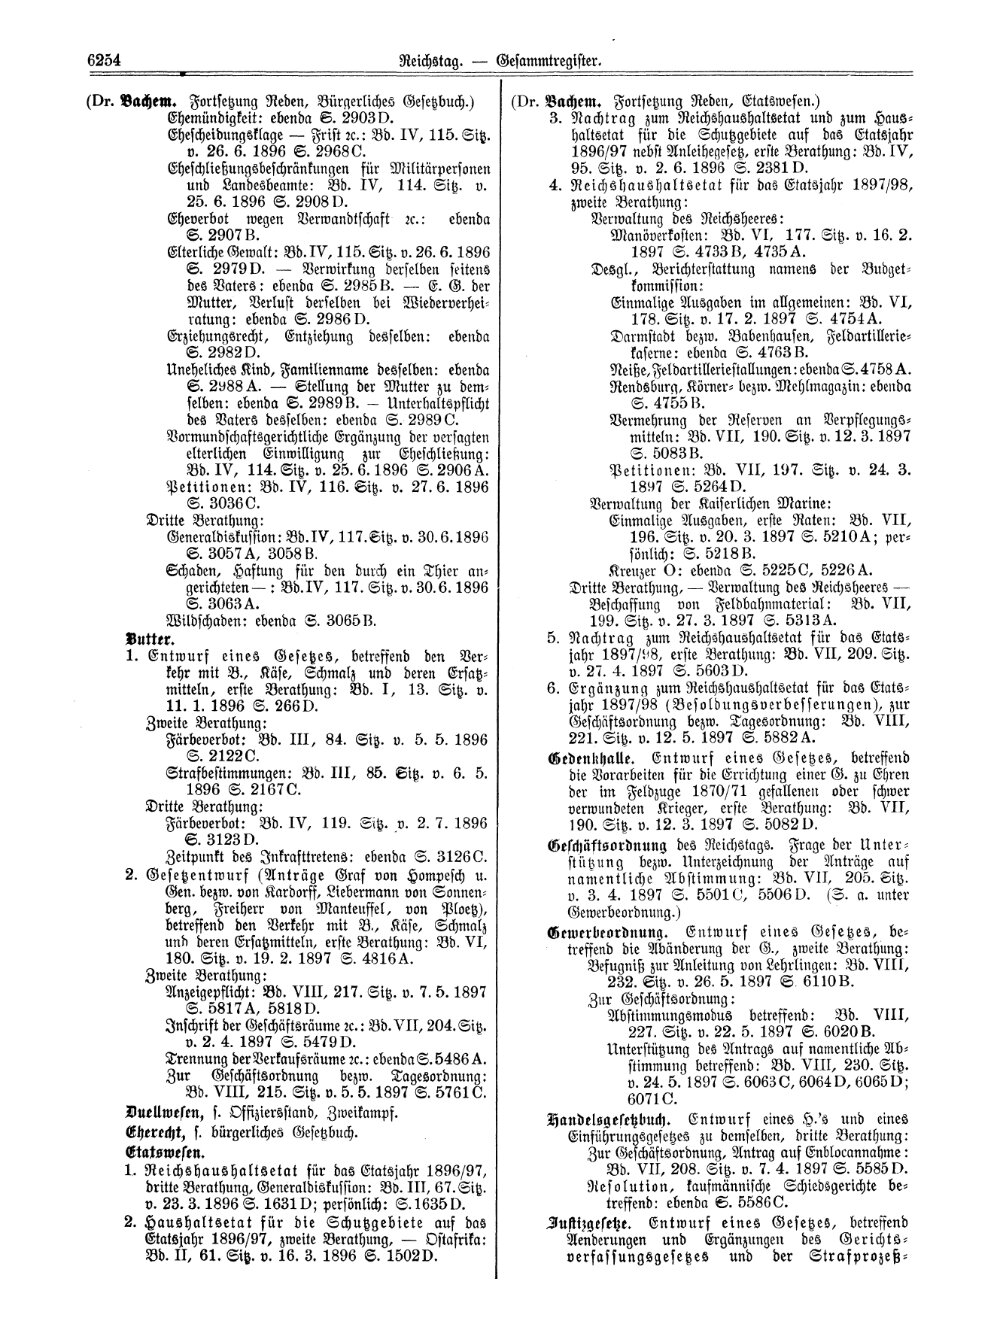 Scan of page 6254